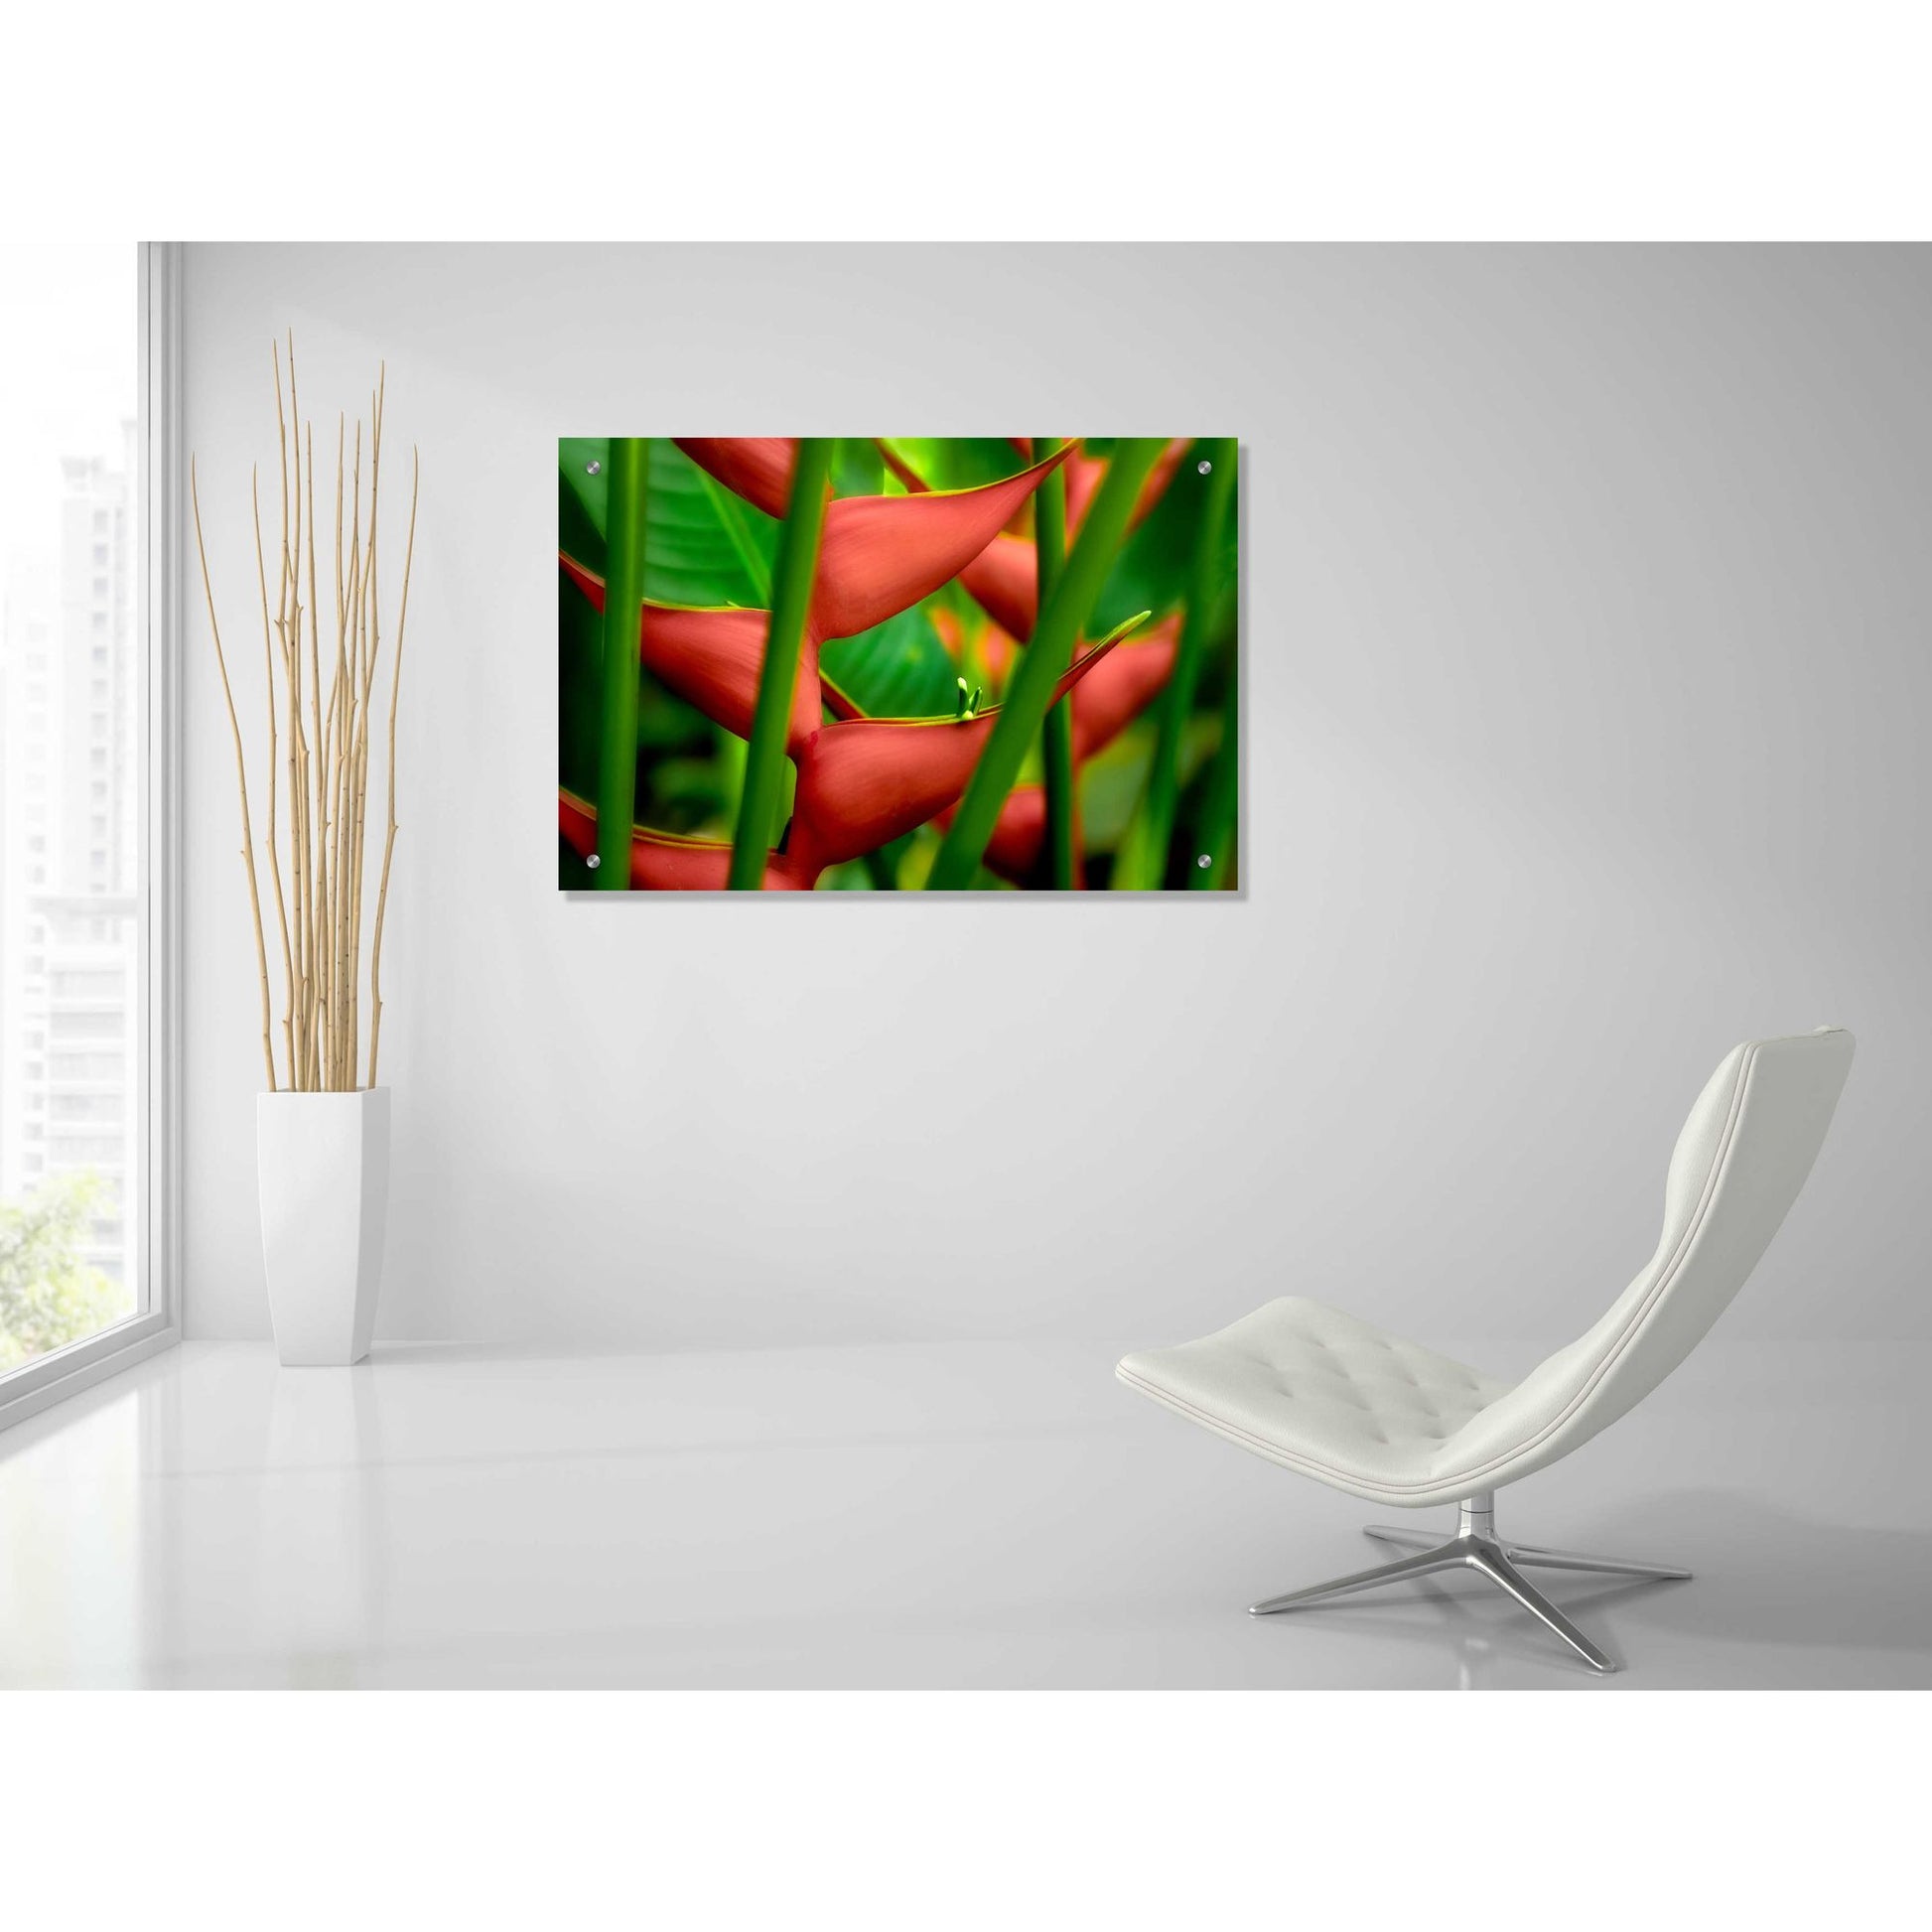 Epic Art 'Floral Details' by Dennis Frates, Acrylic Glass Wall Art,36x24